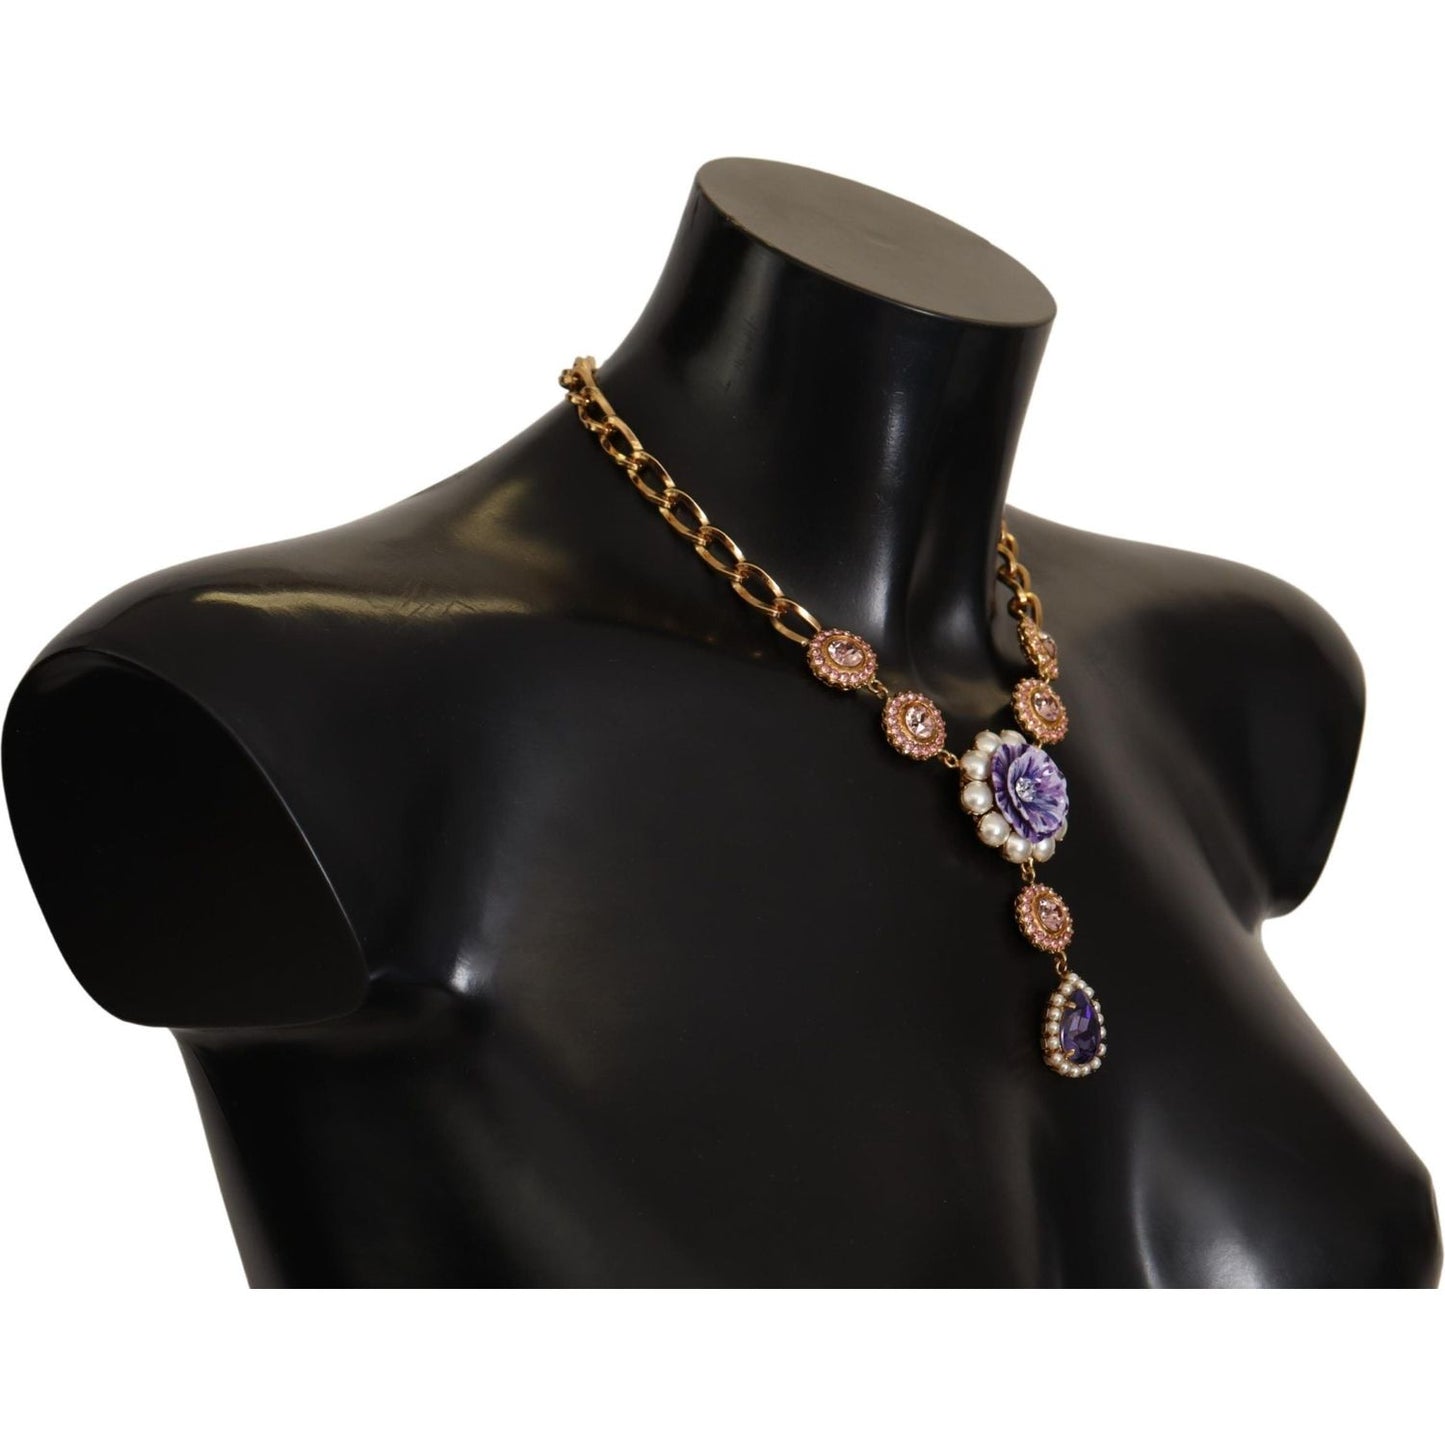 Dolce & Gabbana Elegant Floral Crystal Statement Necklace gold-brass-crystal-purple-pink-pearl-pendants-necklace WOMAN NECKLACE IMG_1960-scaled-2ccd46d6-c17.jpg